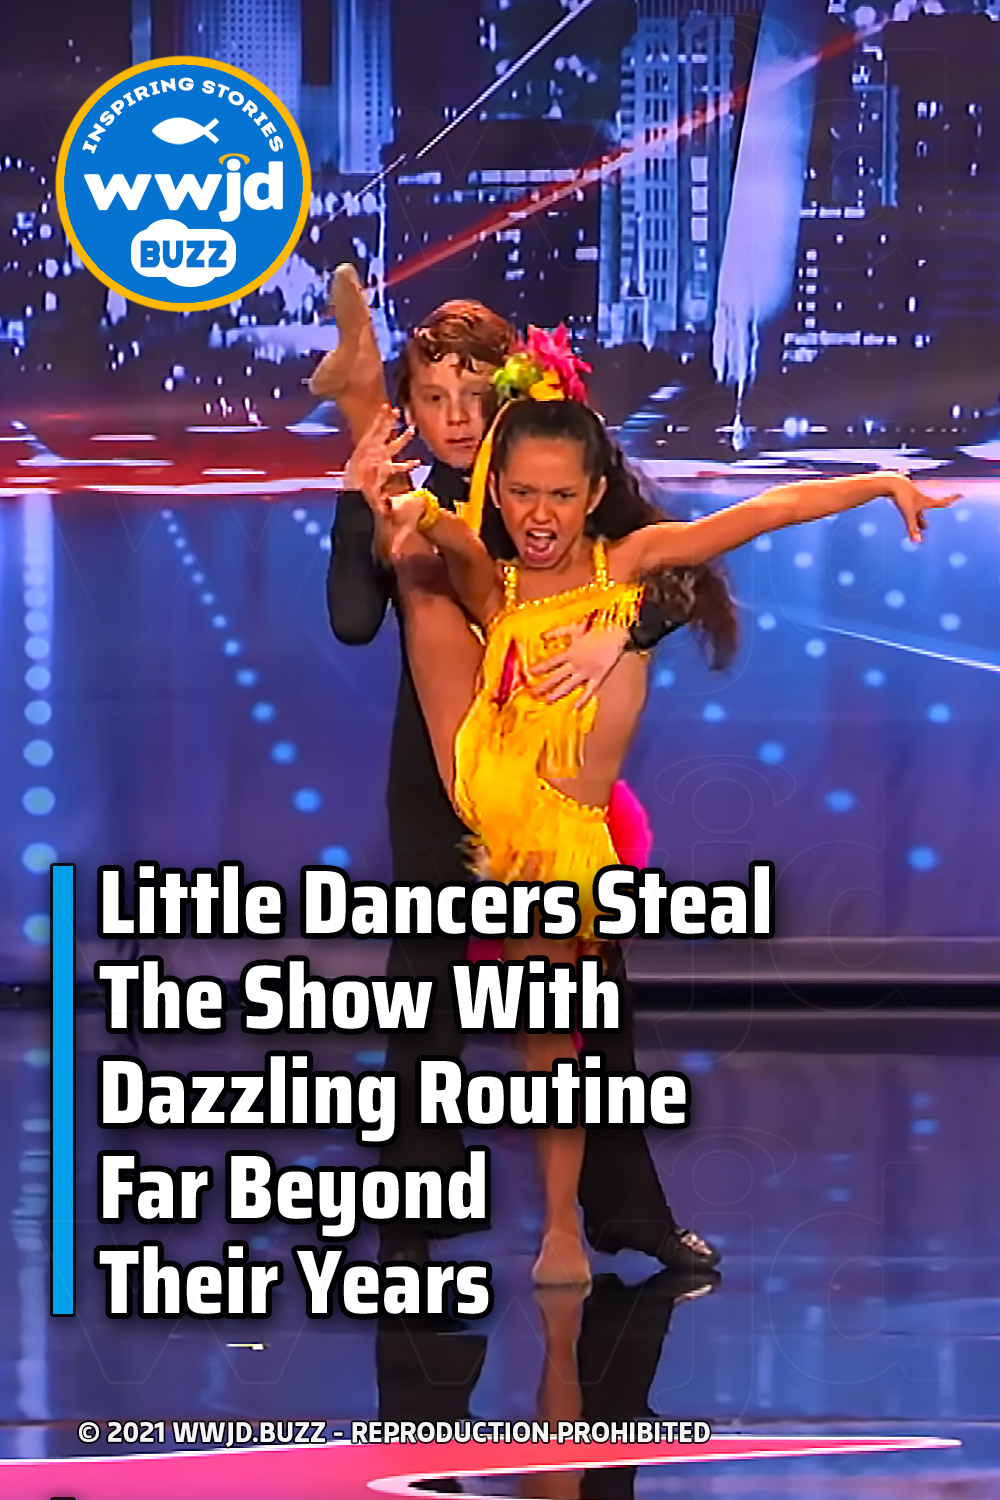 Little Dancers Steal The Show With Dazzling Routine Far Beyond Their Years